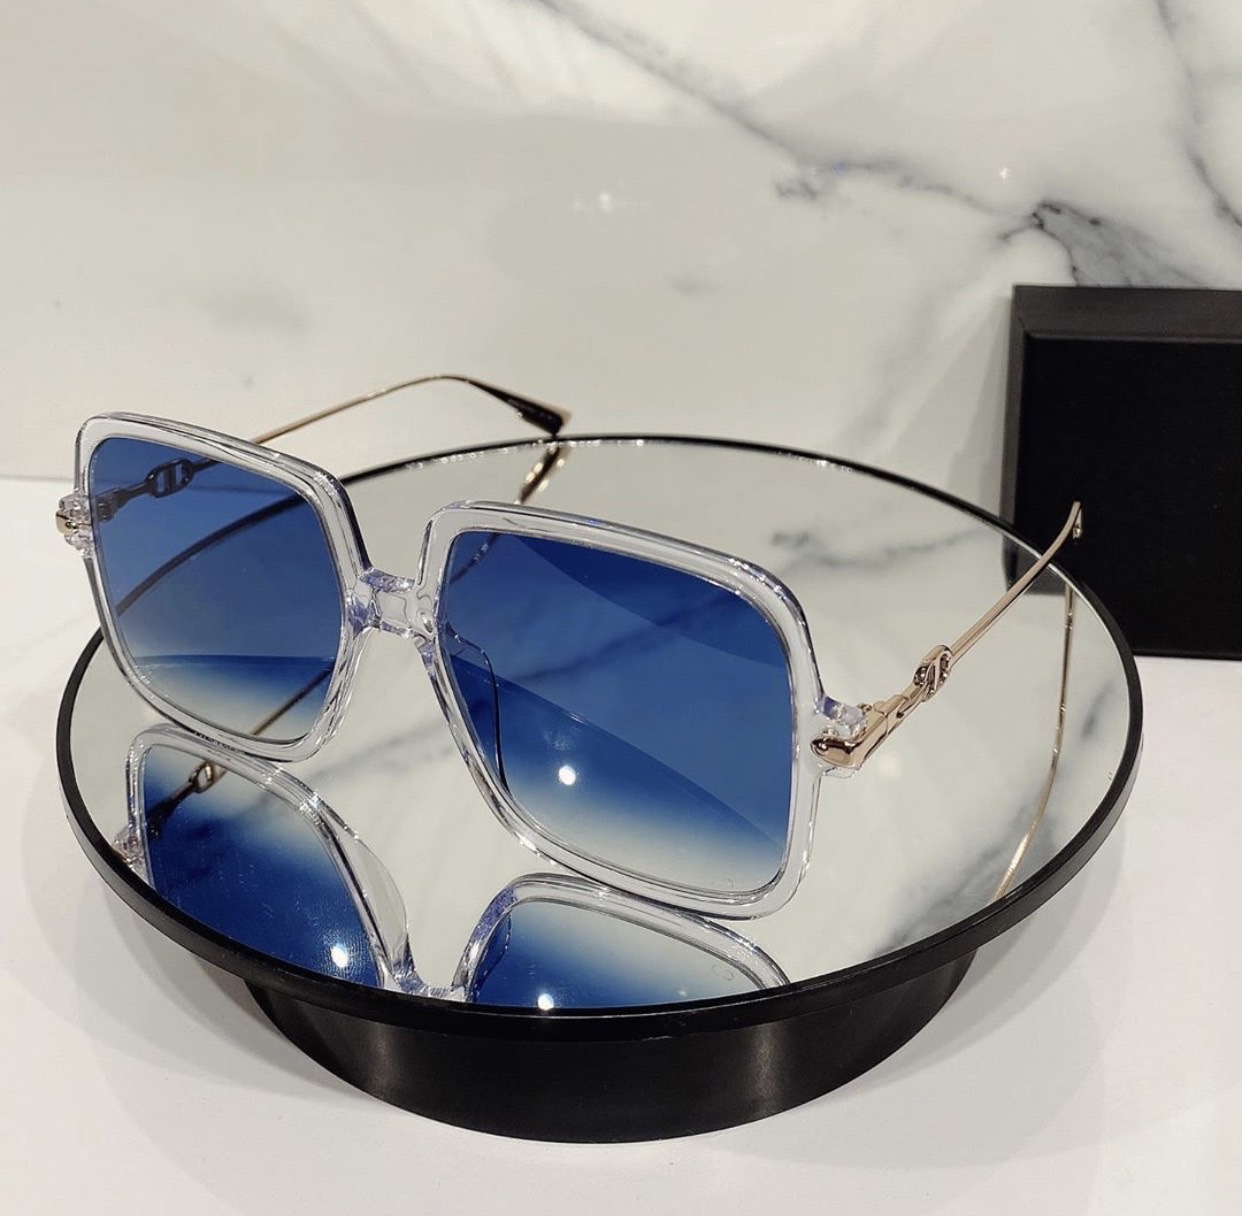 DIOR SUNGLASSES DIOR INSIDE OUT 1 157 19 1452k  ALL ABOUT KOREA